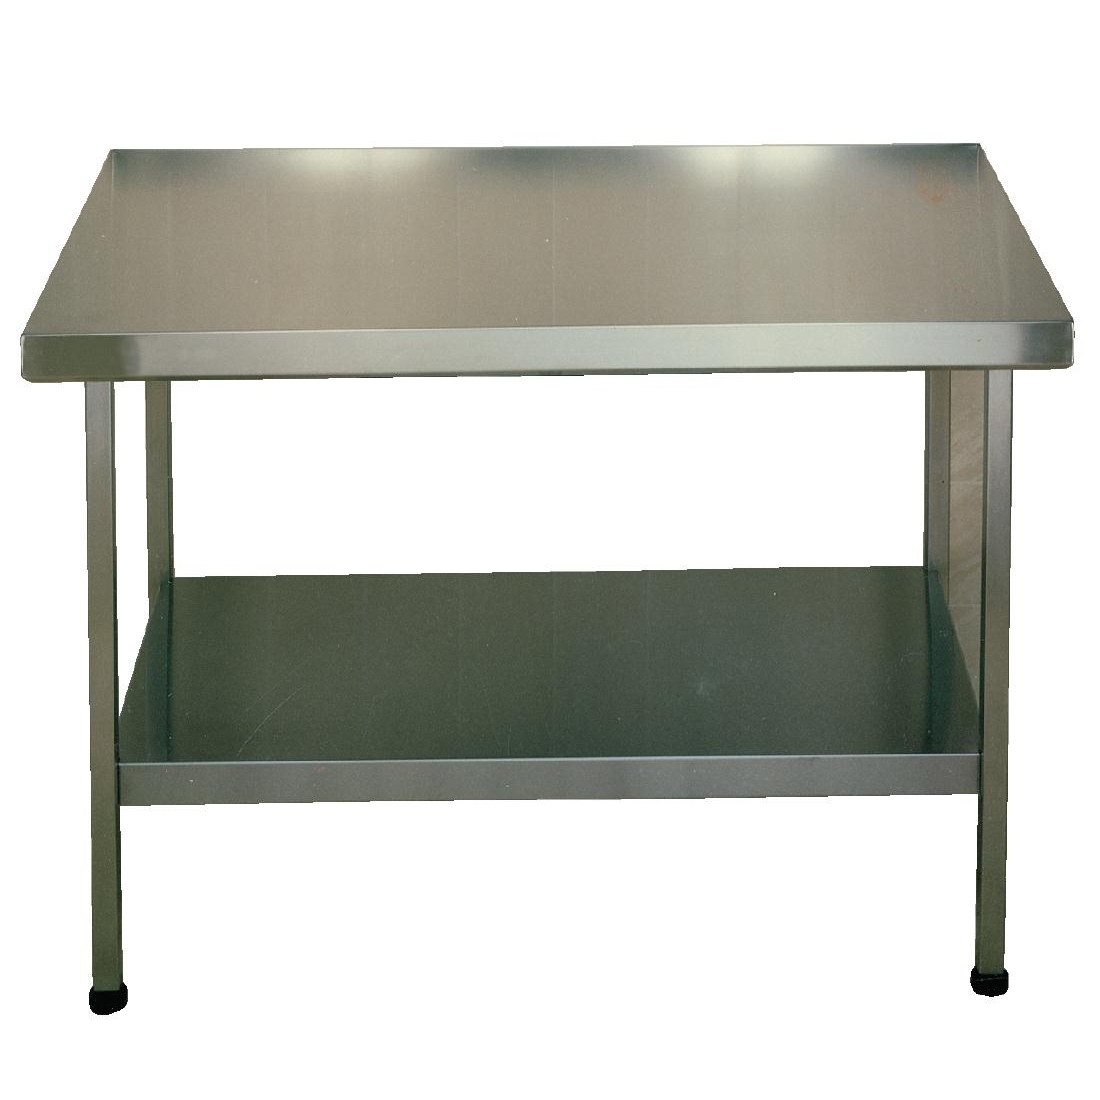 Franke Sissons Stainless Steel Centre Table 1800x650mm